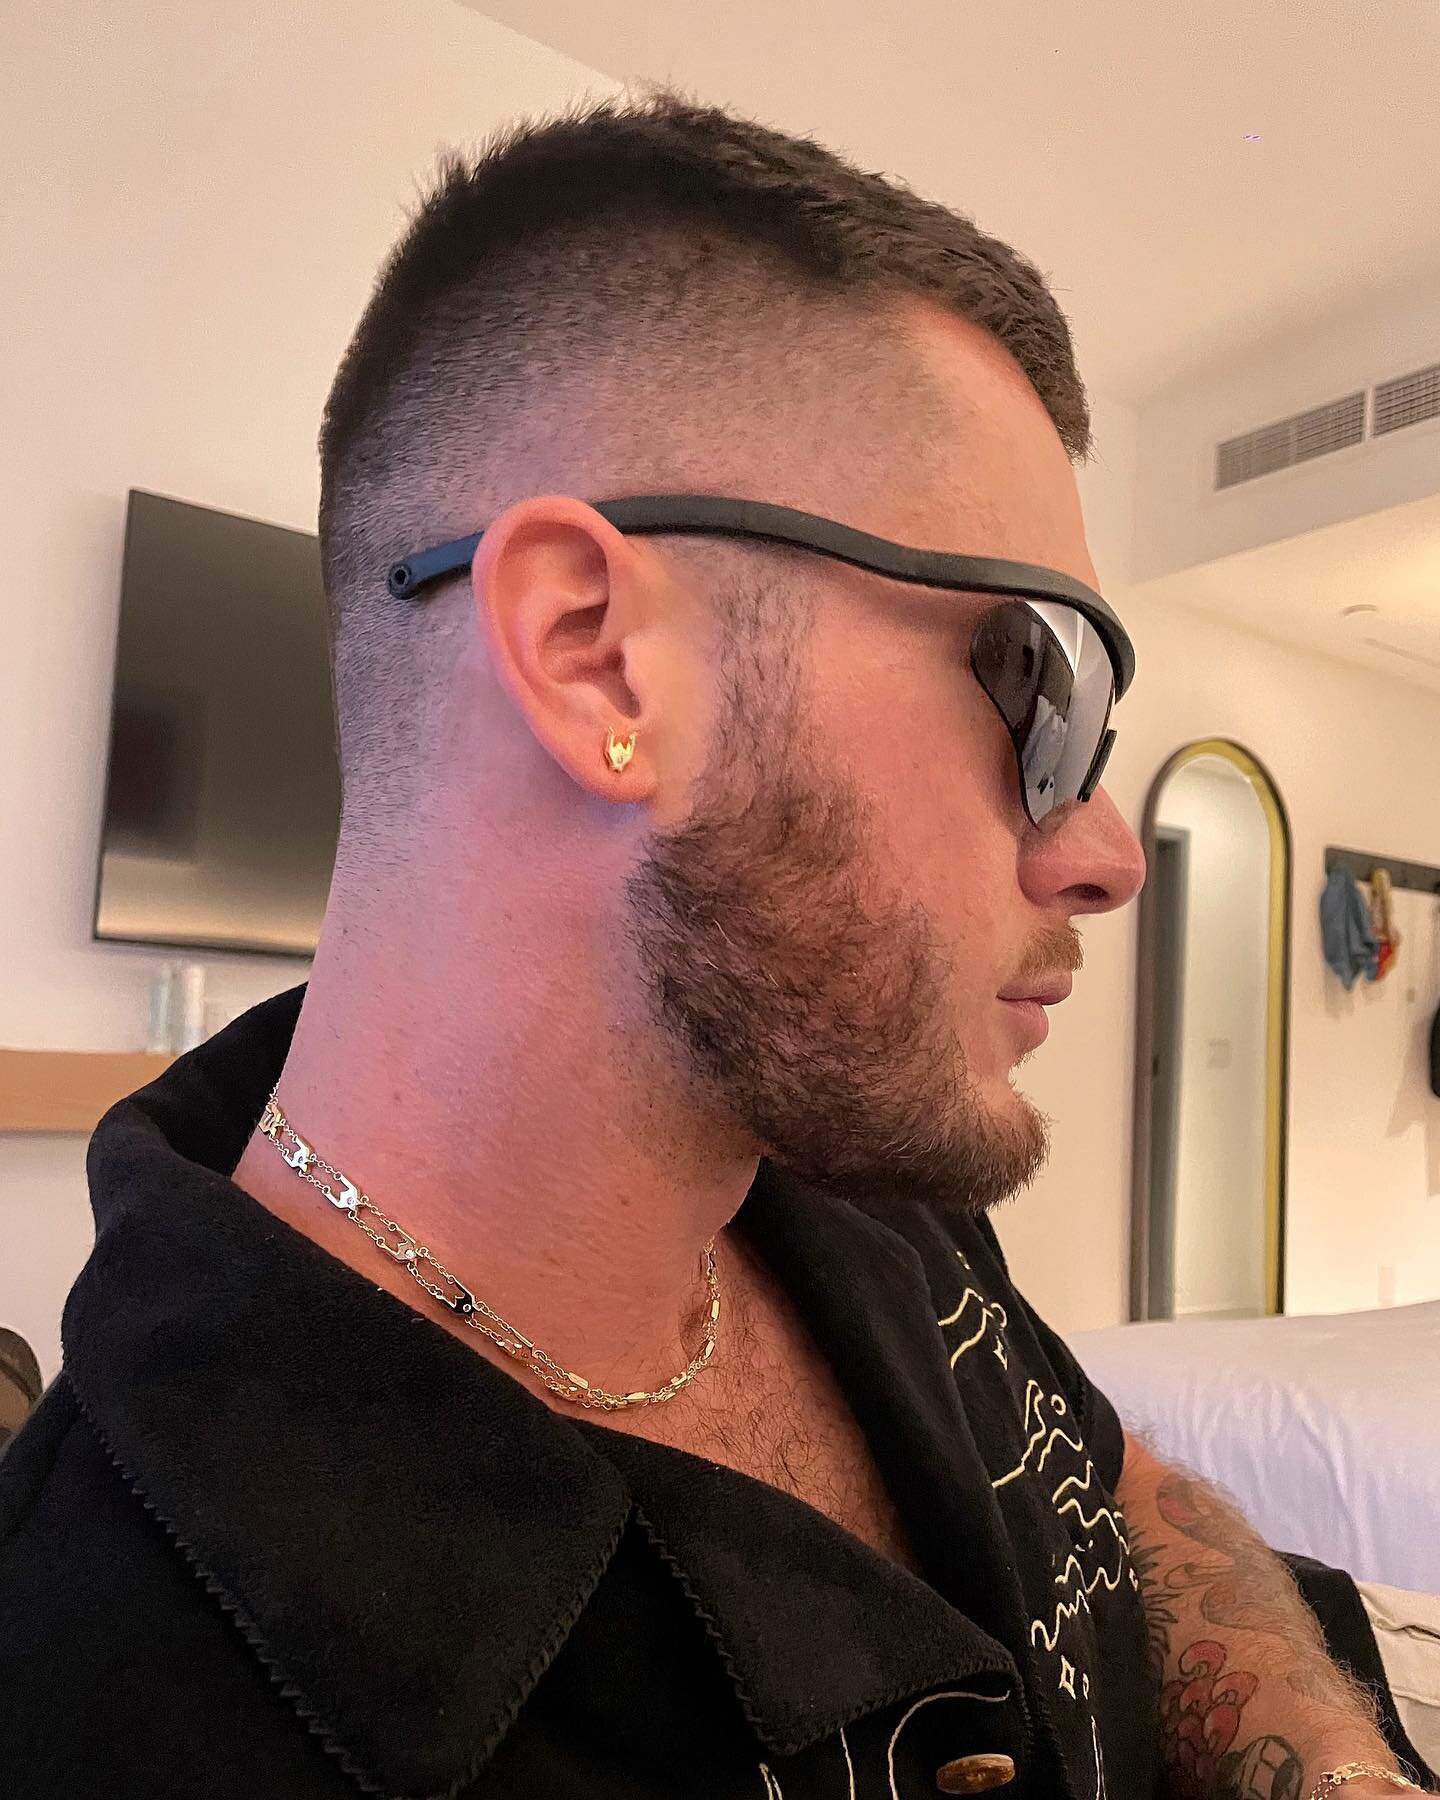 A versatile stud @tannblou wearing the houndstooth stud, necklace and bracelet in 14k gold.